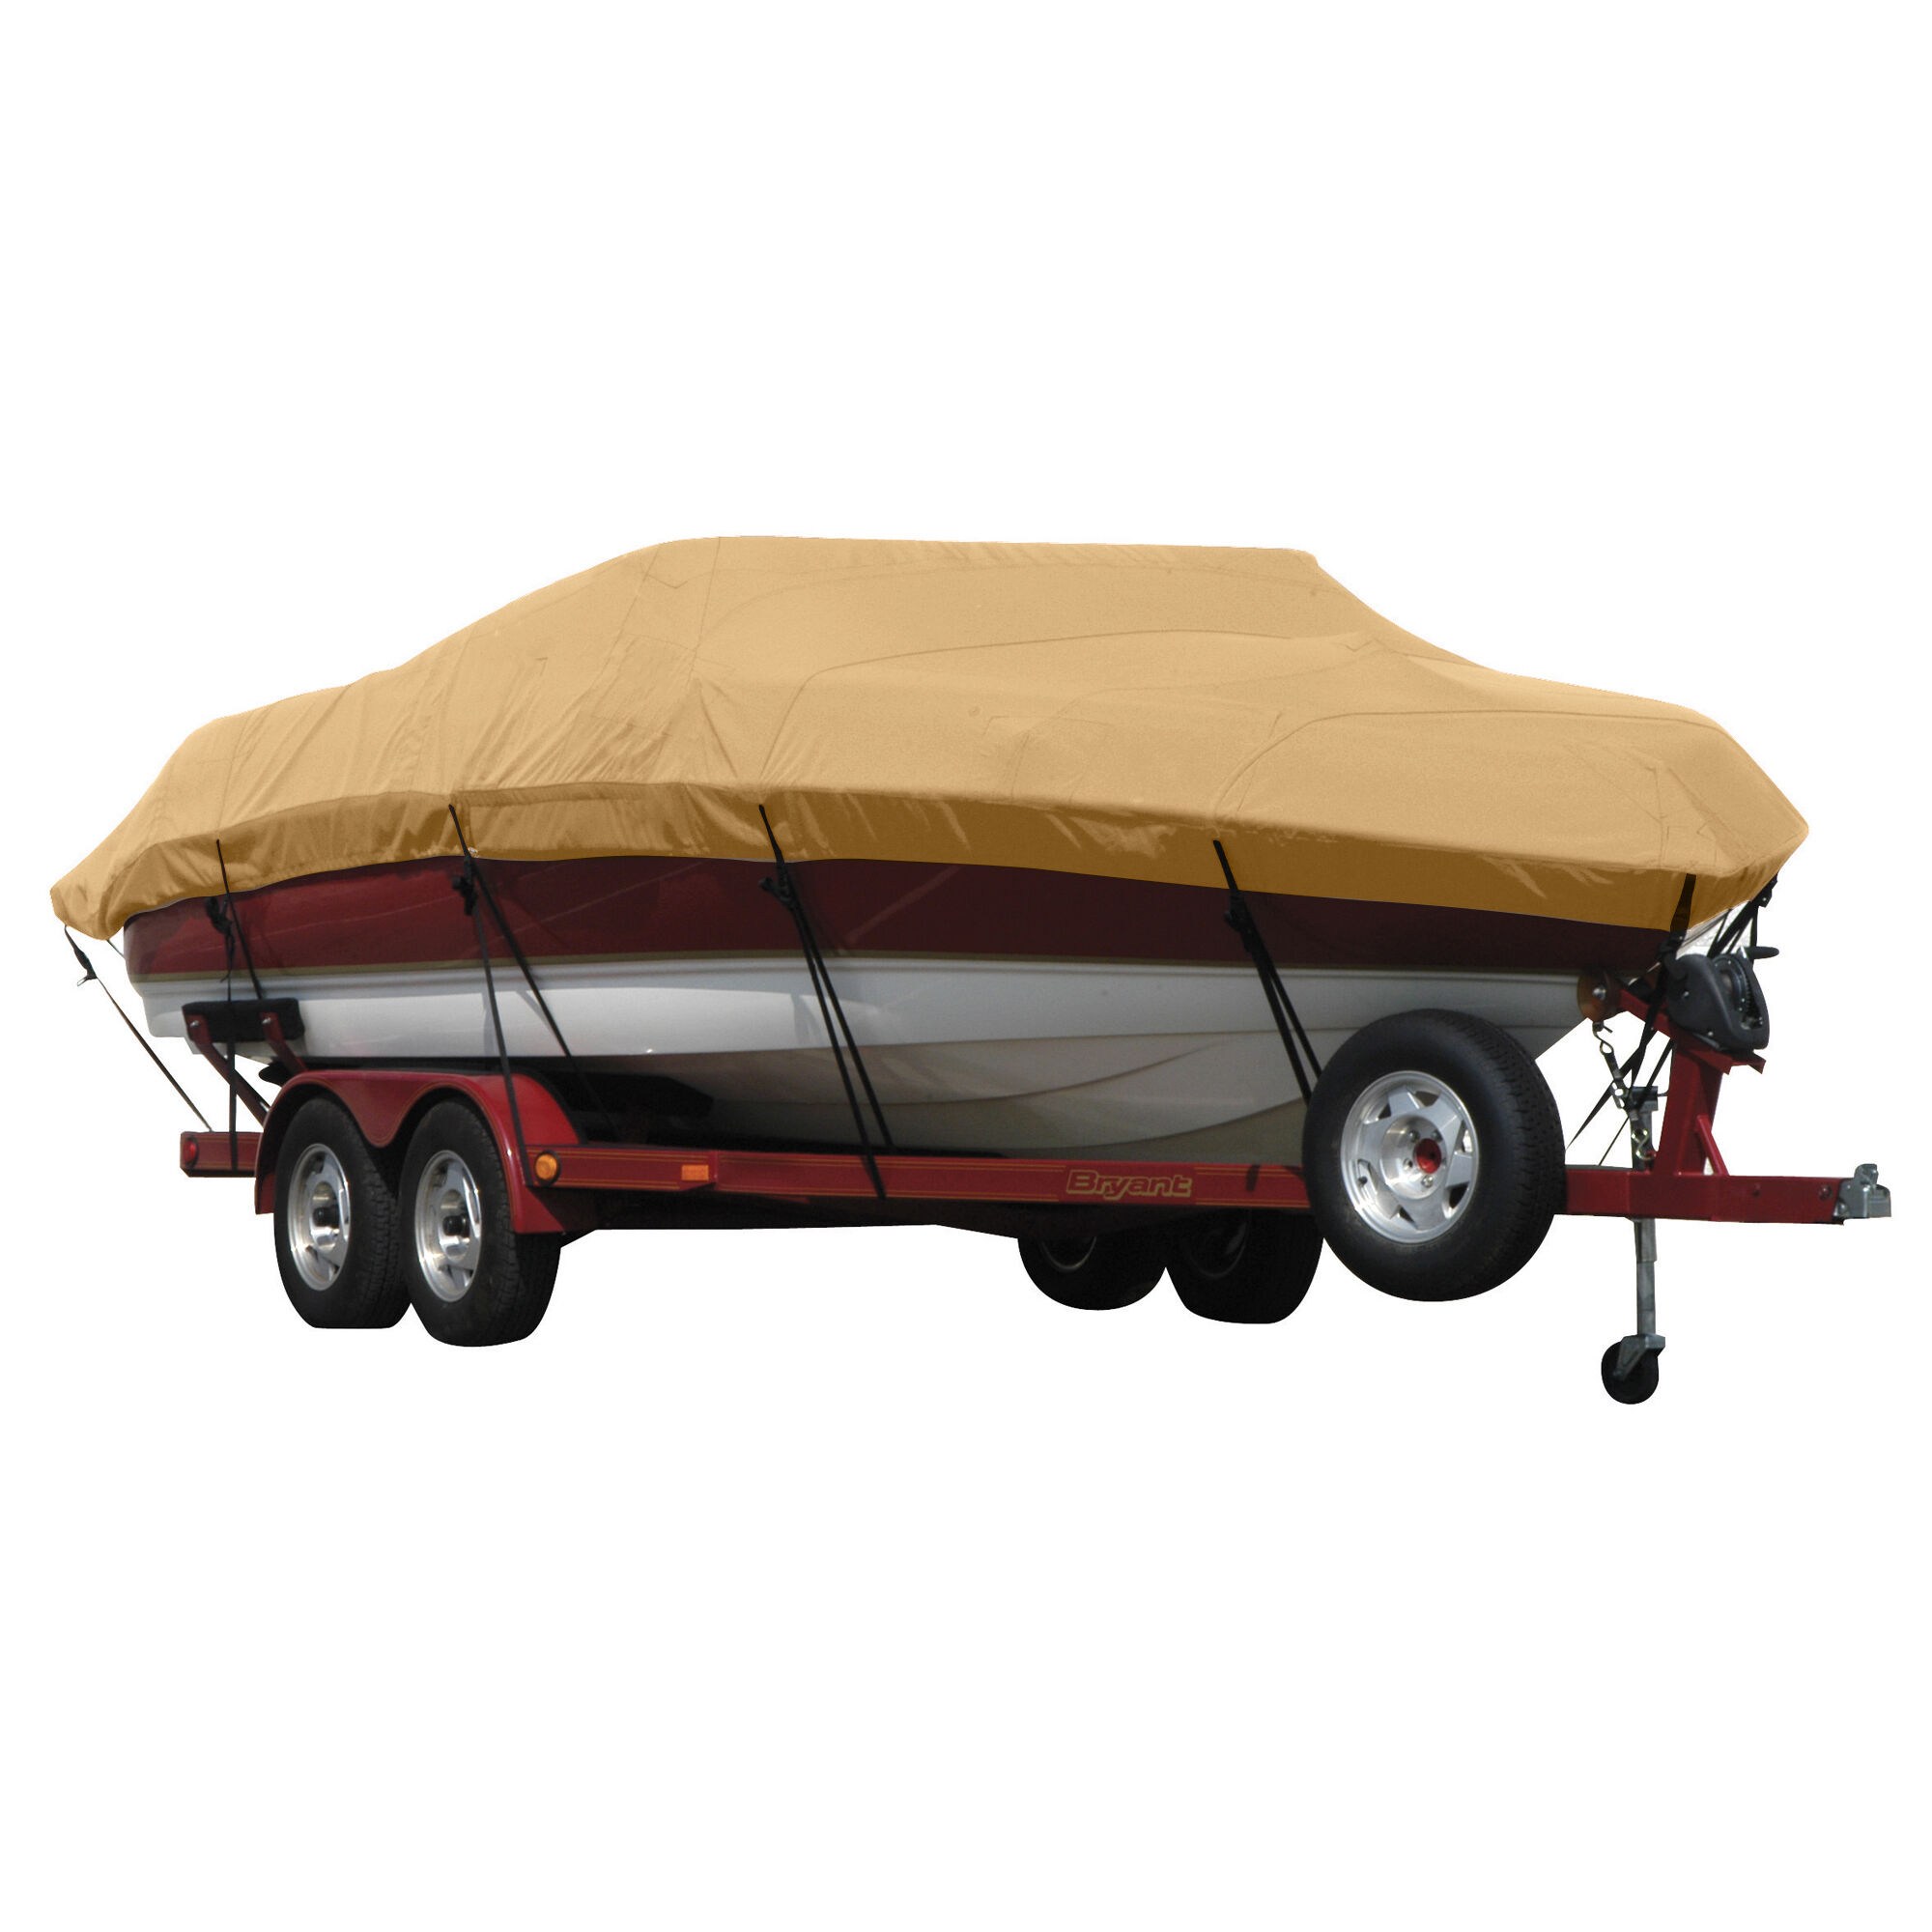 Covermate Exact Fit Sunbrella Boat Cover For Alumacraft Crappie Deluxe w/ Trolling Motor/Stick Steer in Toast